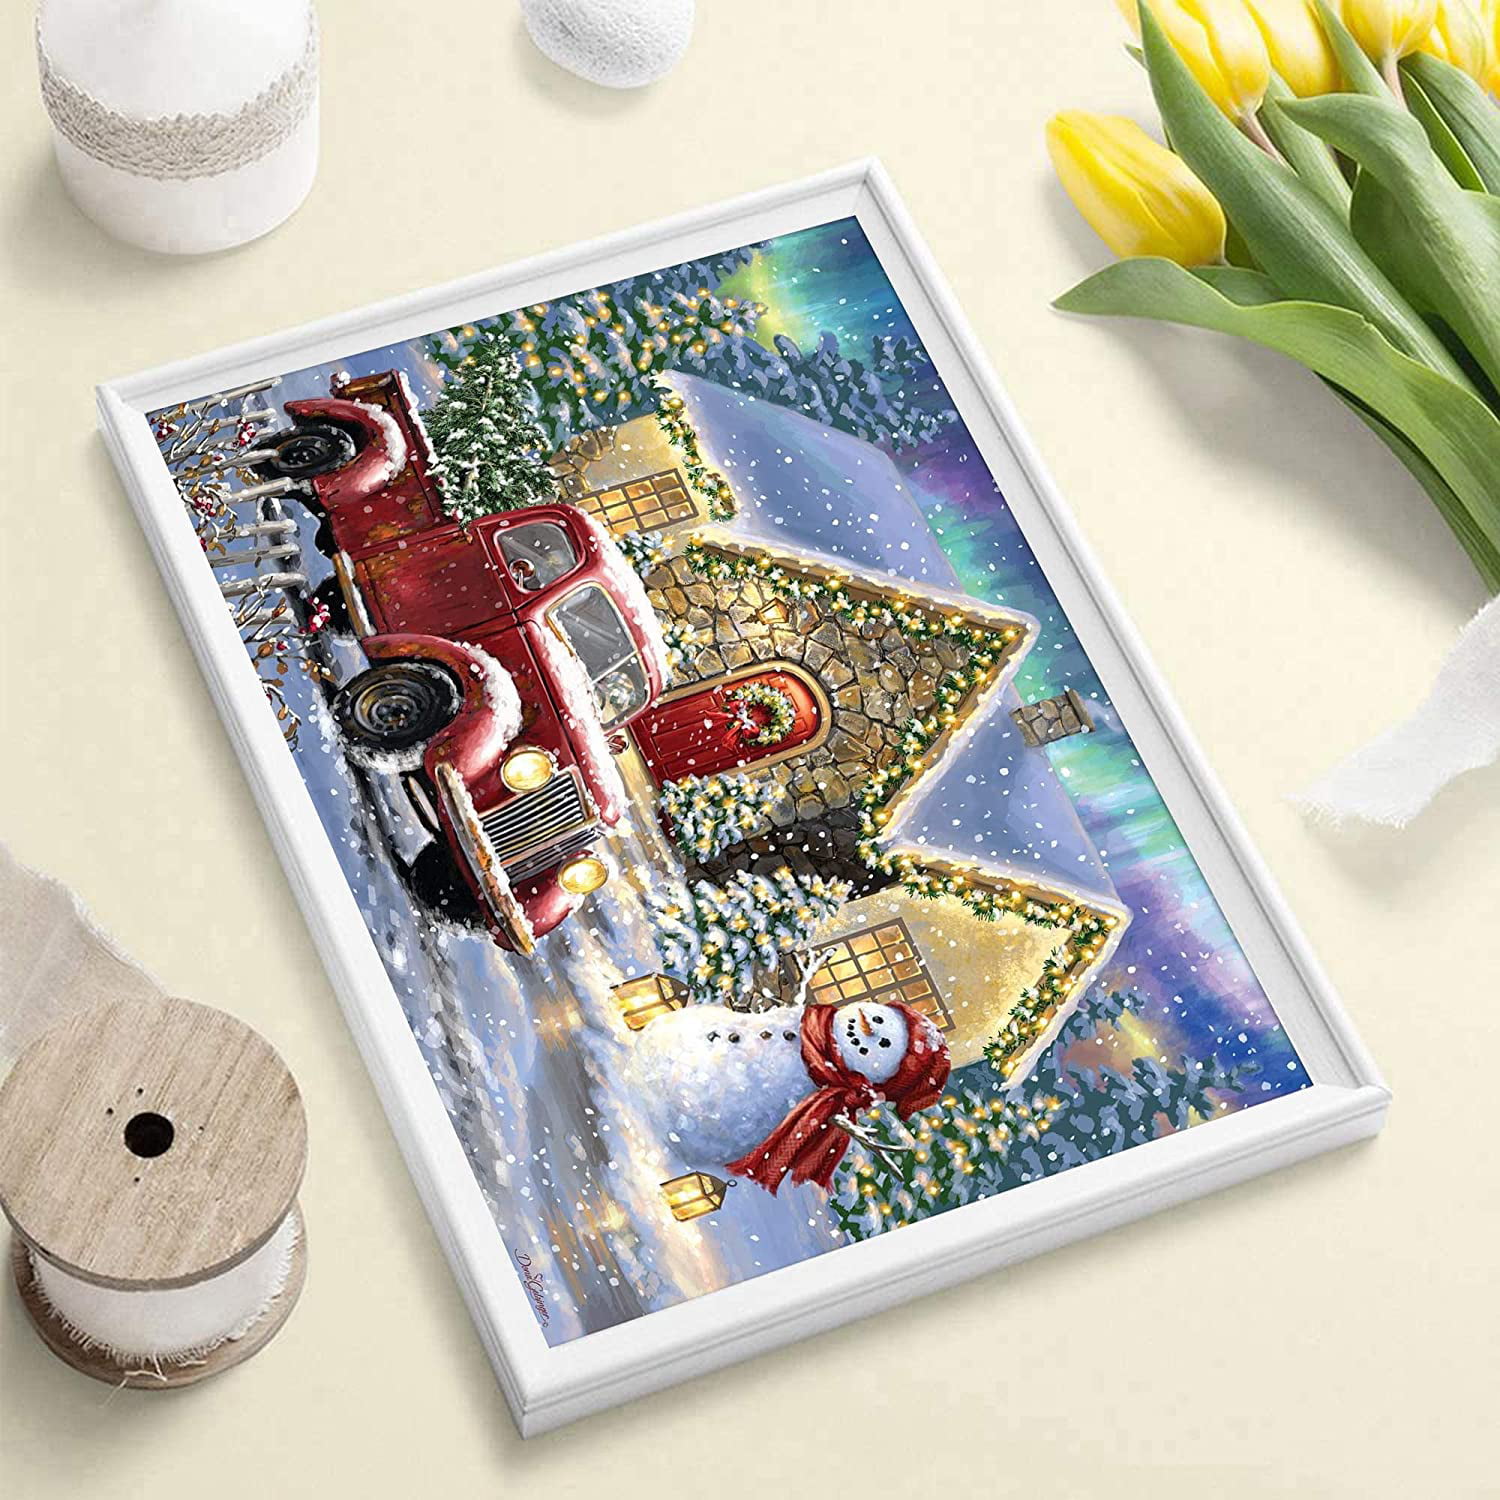  Vintage Christmas Candle Diamond Painting Kits, Diamond Painting  Adult Children Parent-Child DIY 5D Round Diamond Cross Stitch Craft, for  Wall Decor Club Decor Or Holiday Gift(12X18Inch)